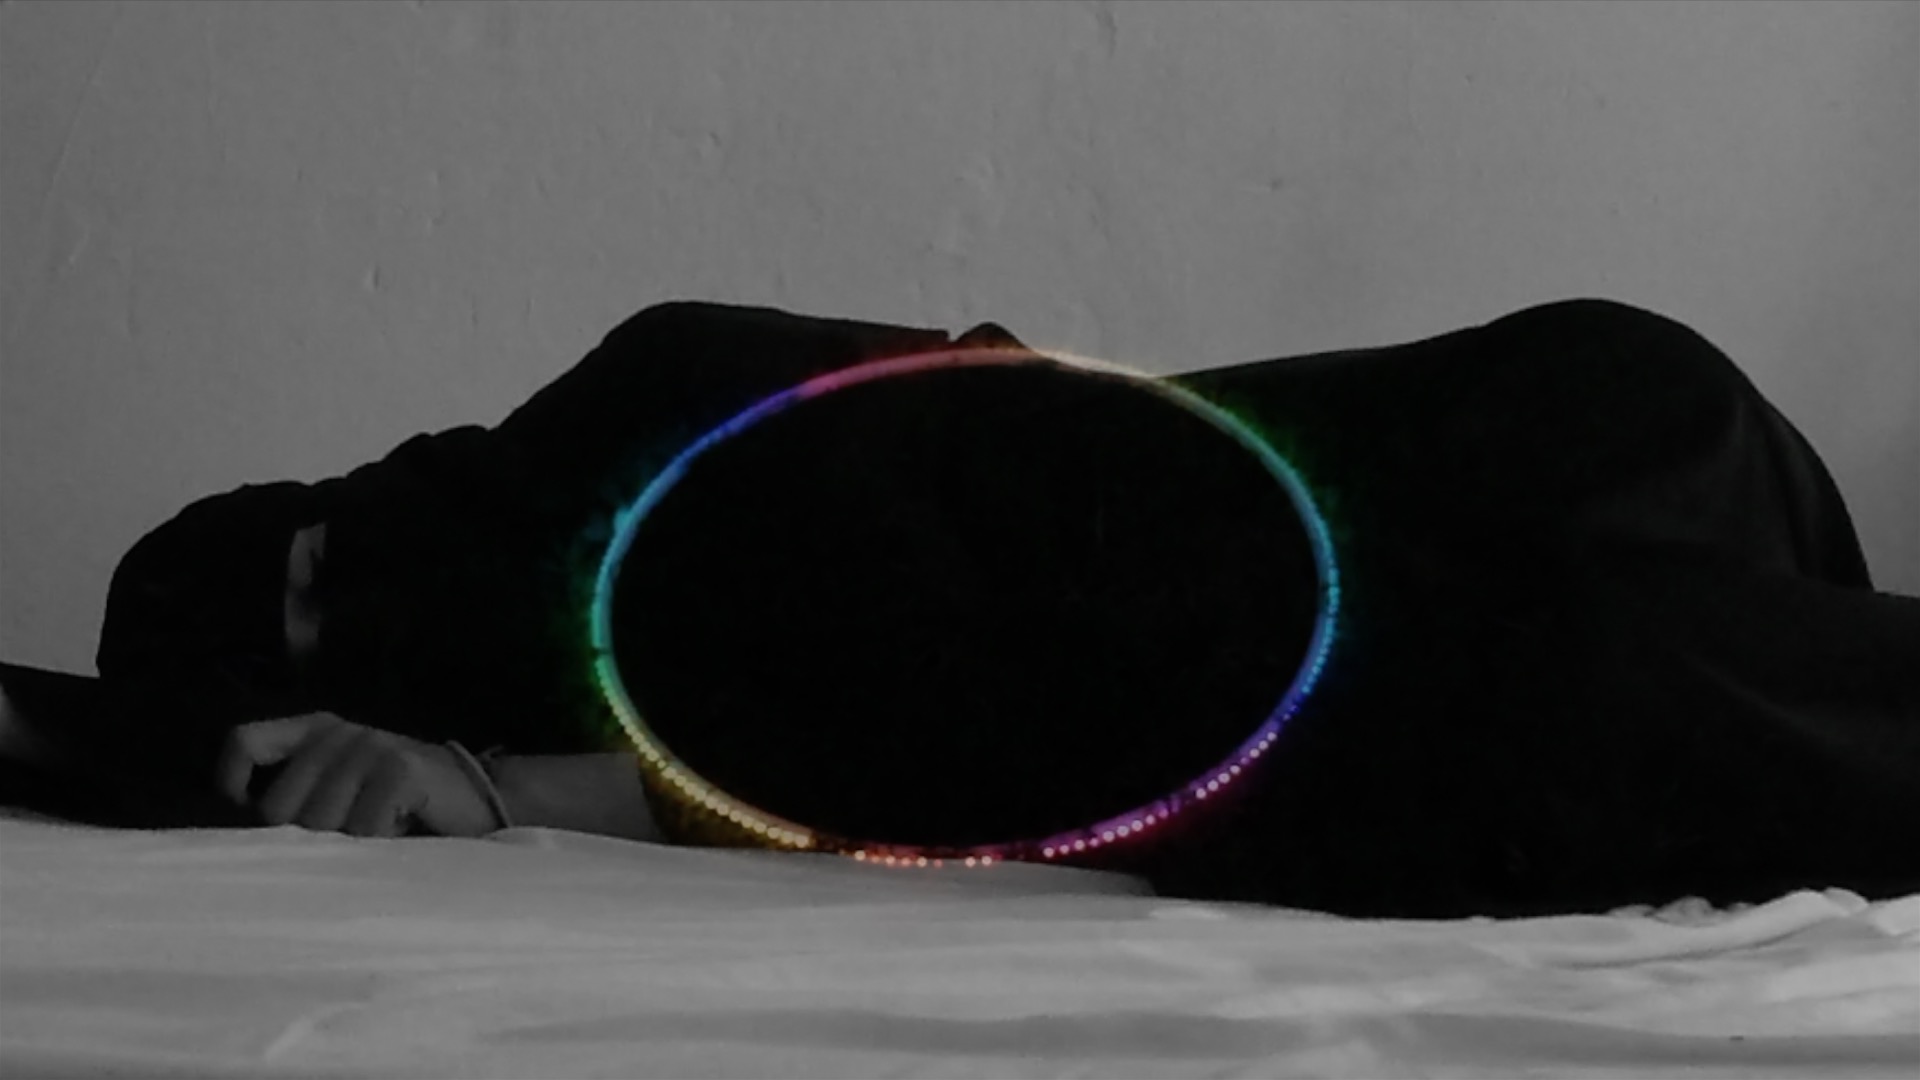 A woman lying on the floor with a multi-coloured hoola hoop resting on her body